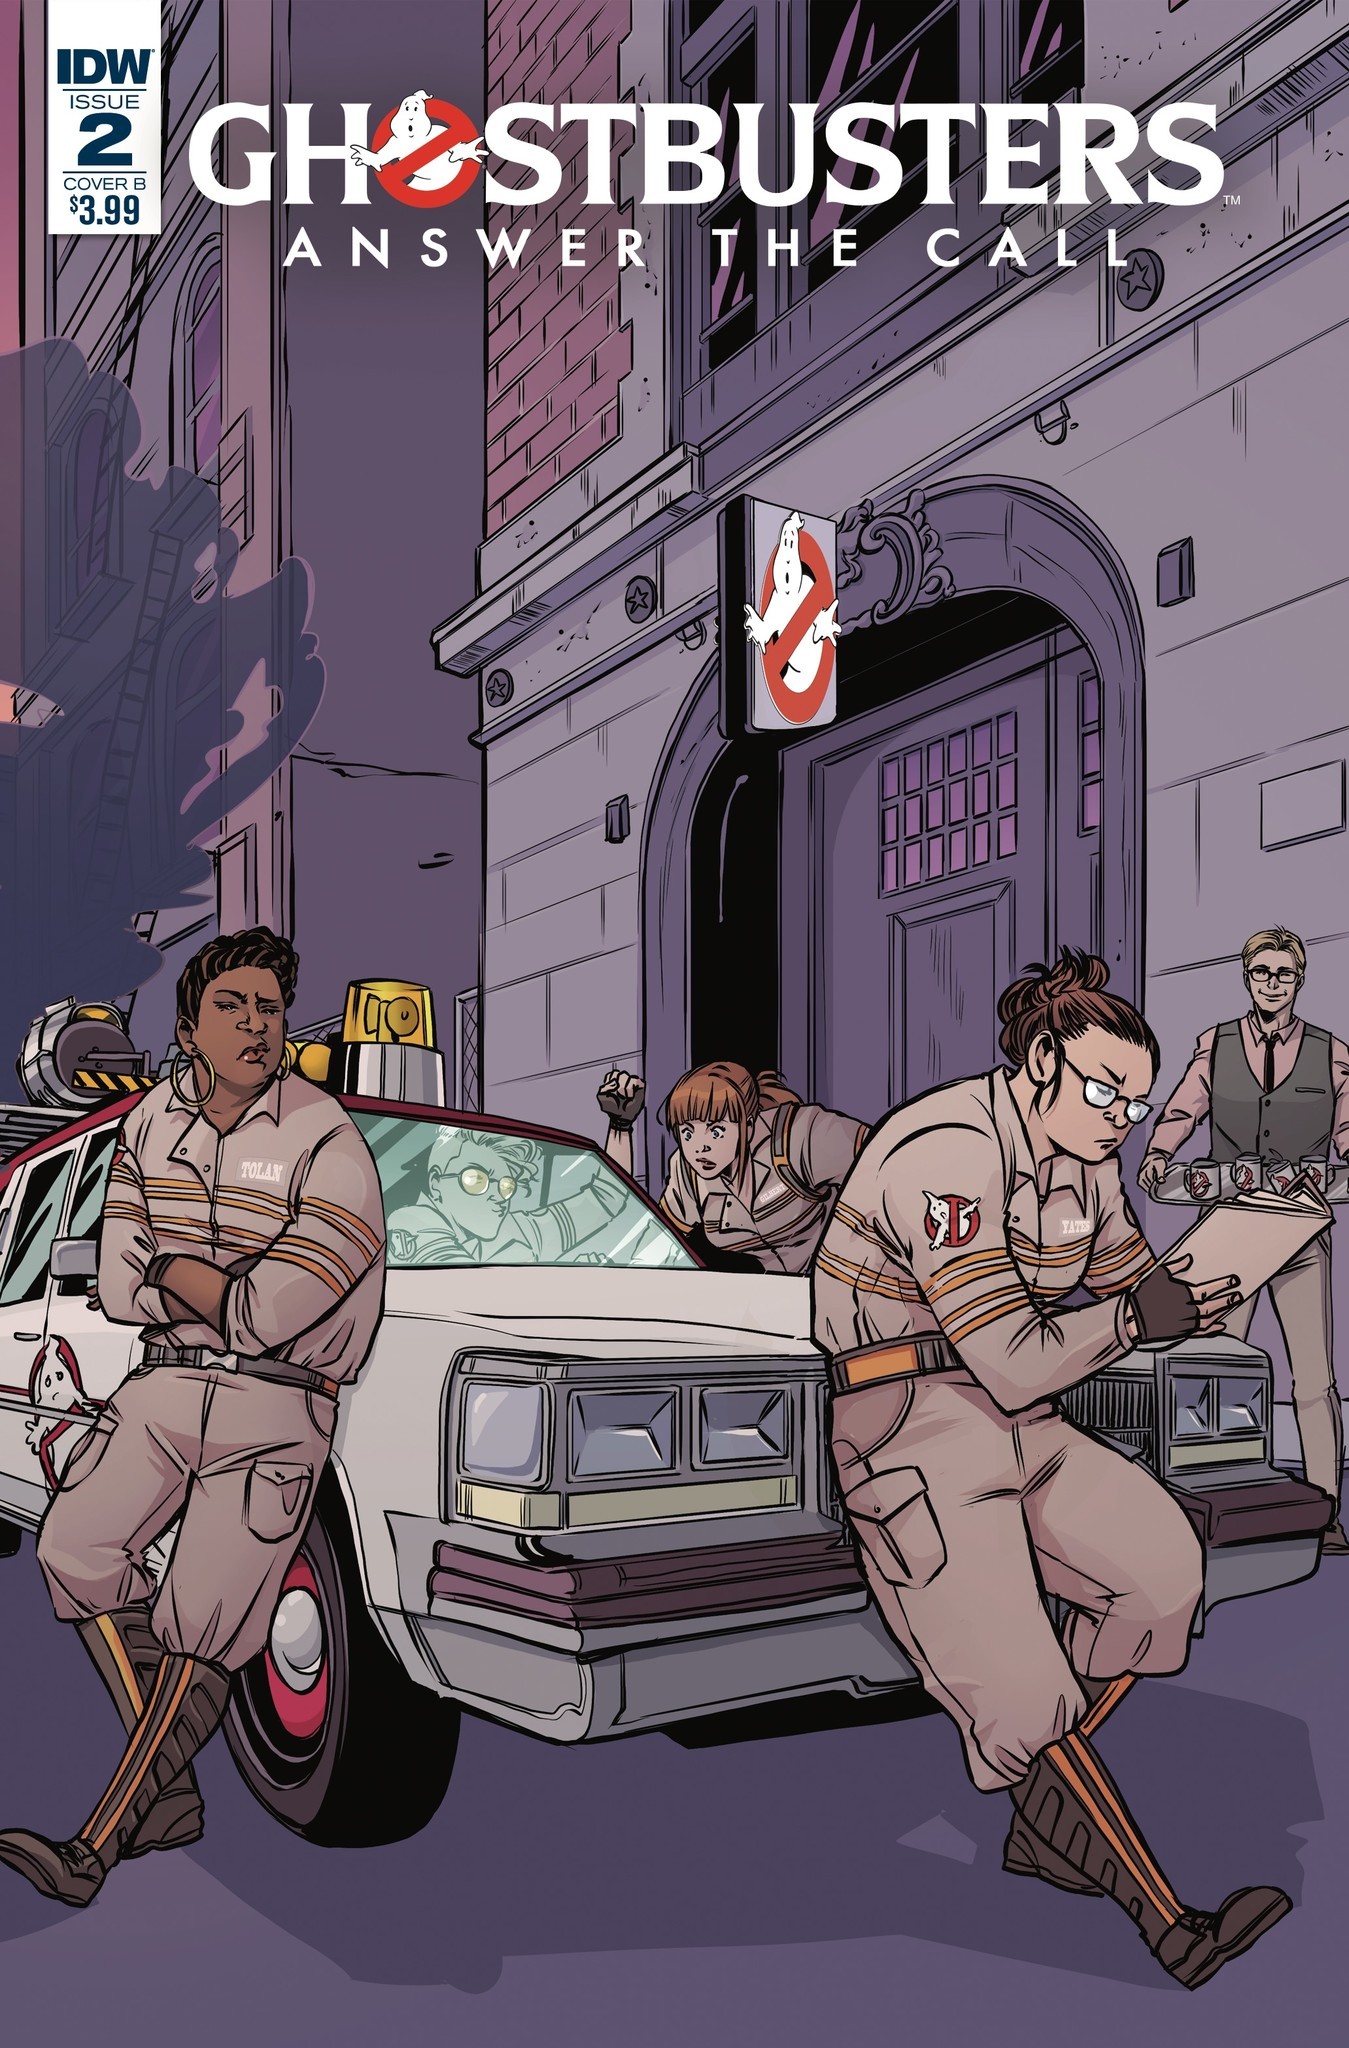 The cover for "Ghostbusters: Answer the Call" No. 2 by artist Emma Viecelli and colorist Luis Antonio Delgado.